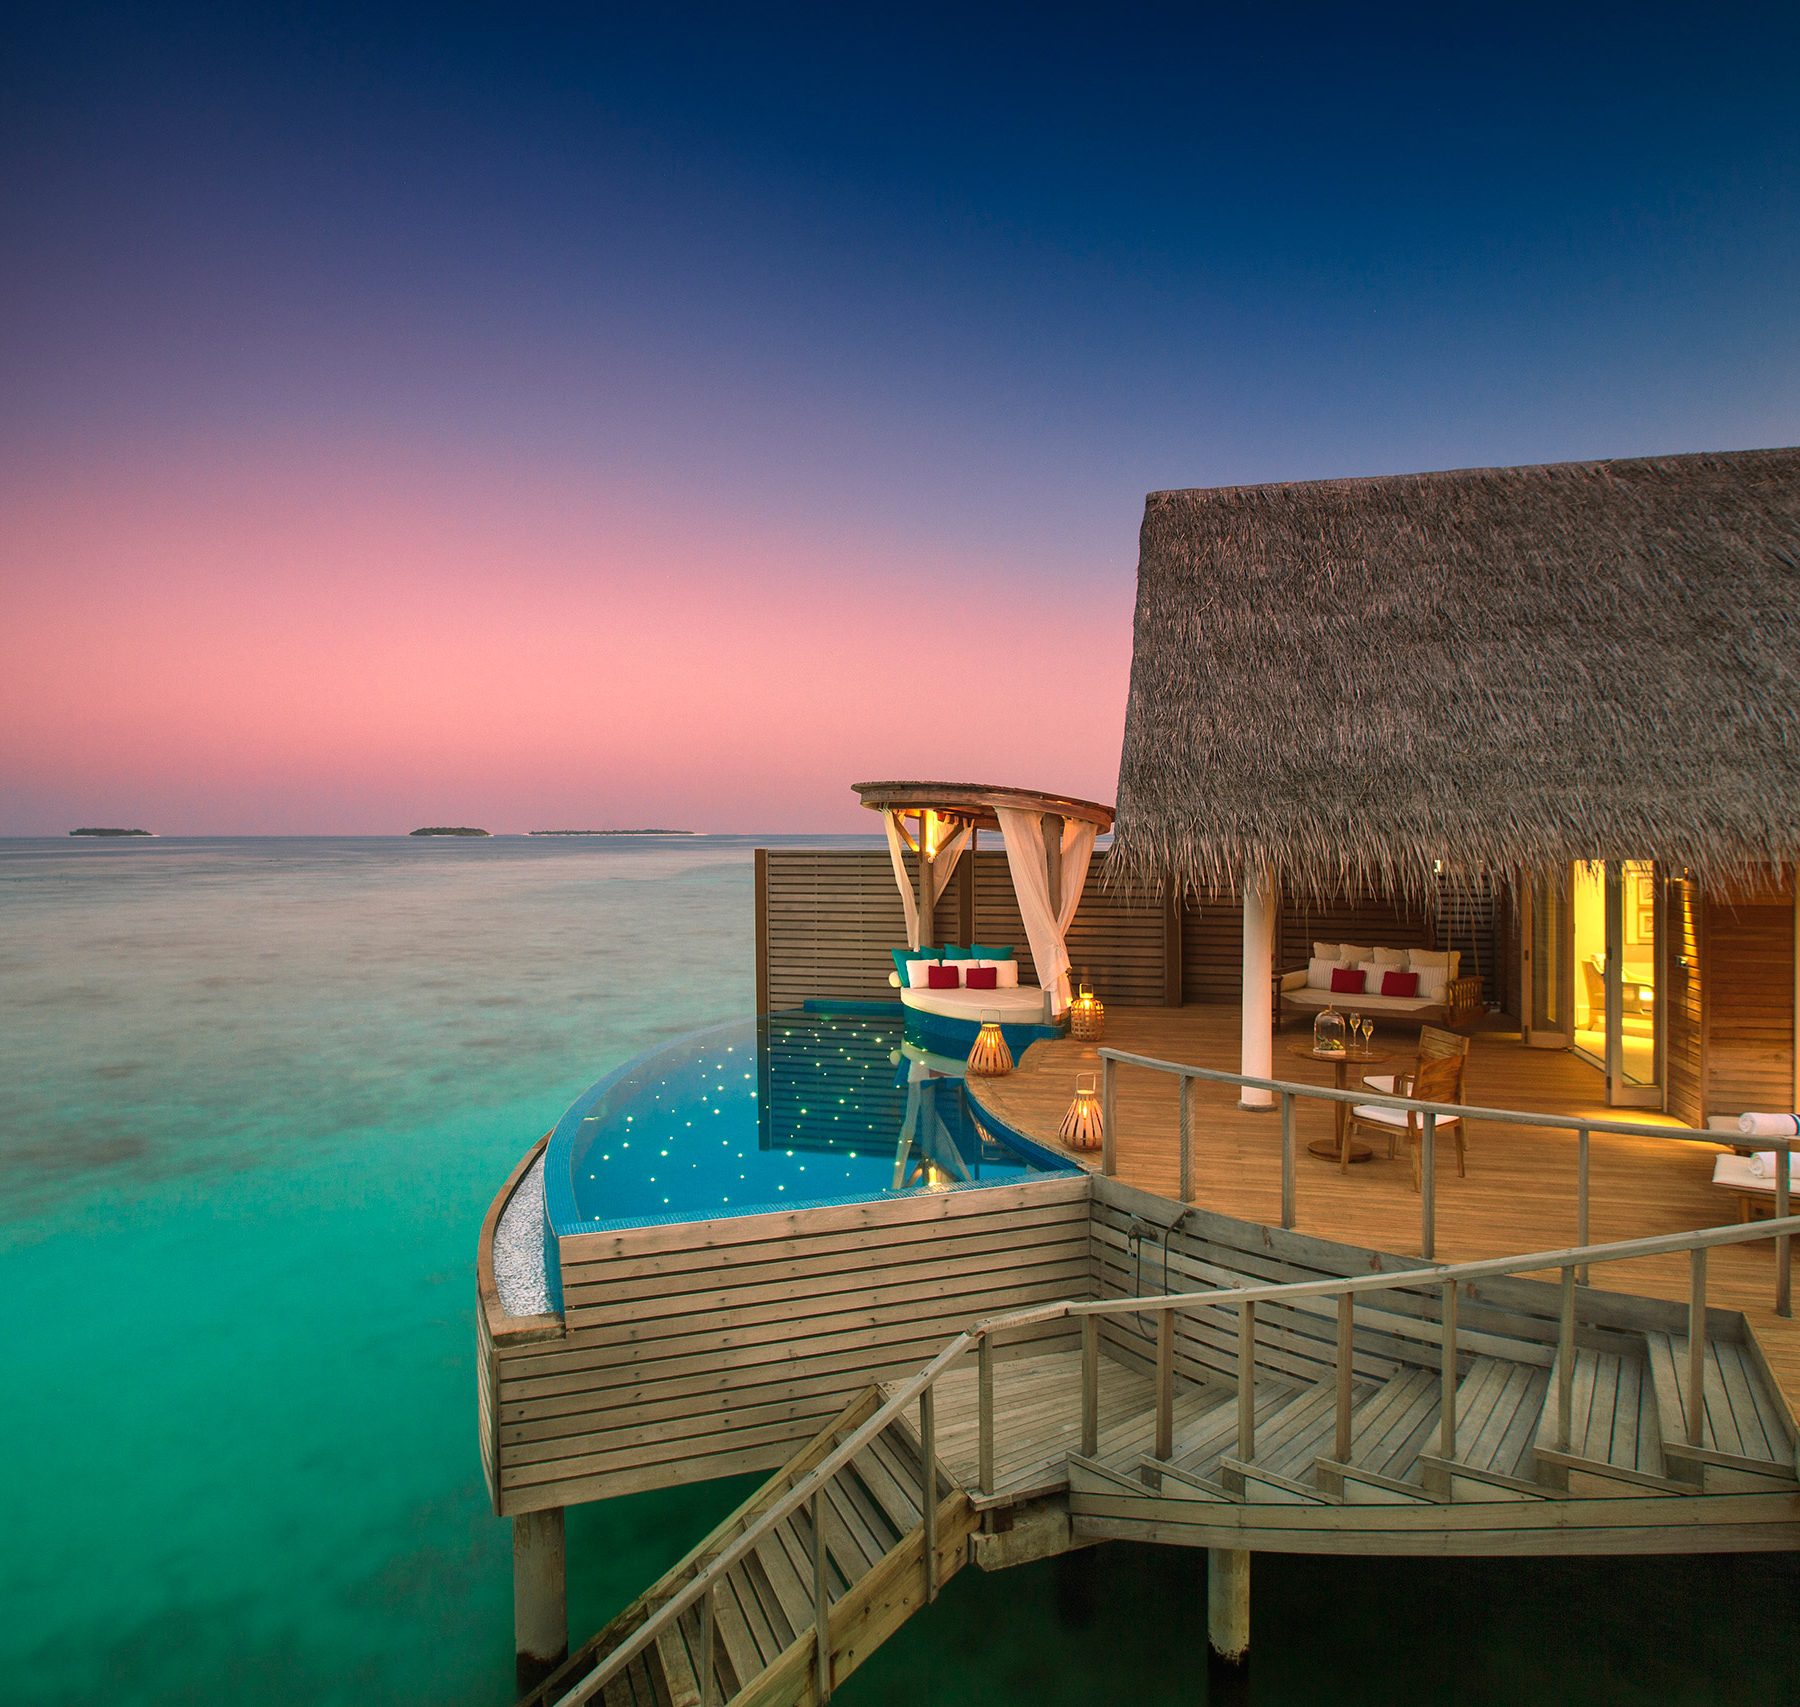 View across the Indian Ocean and the Water Pool Villa at Milaidhoo Island in the Maldives at dusk